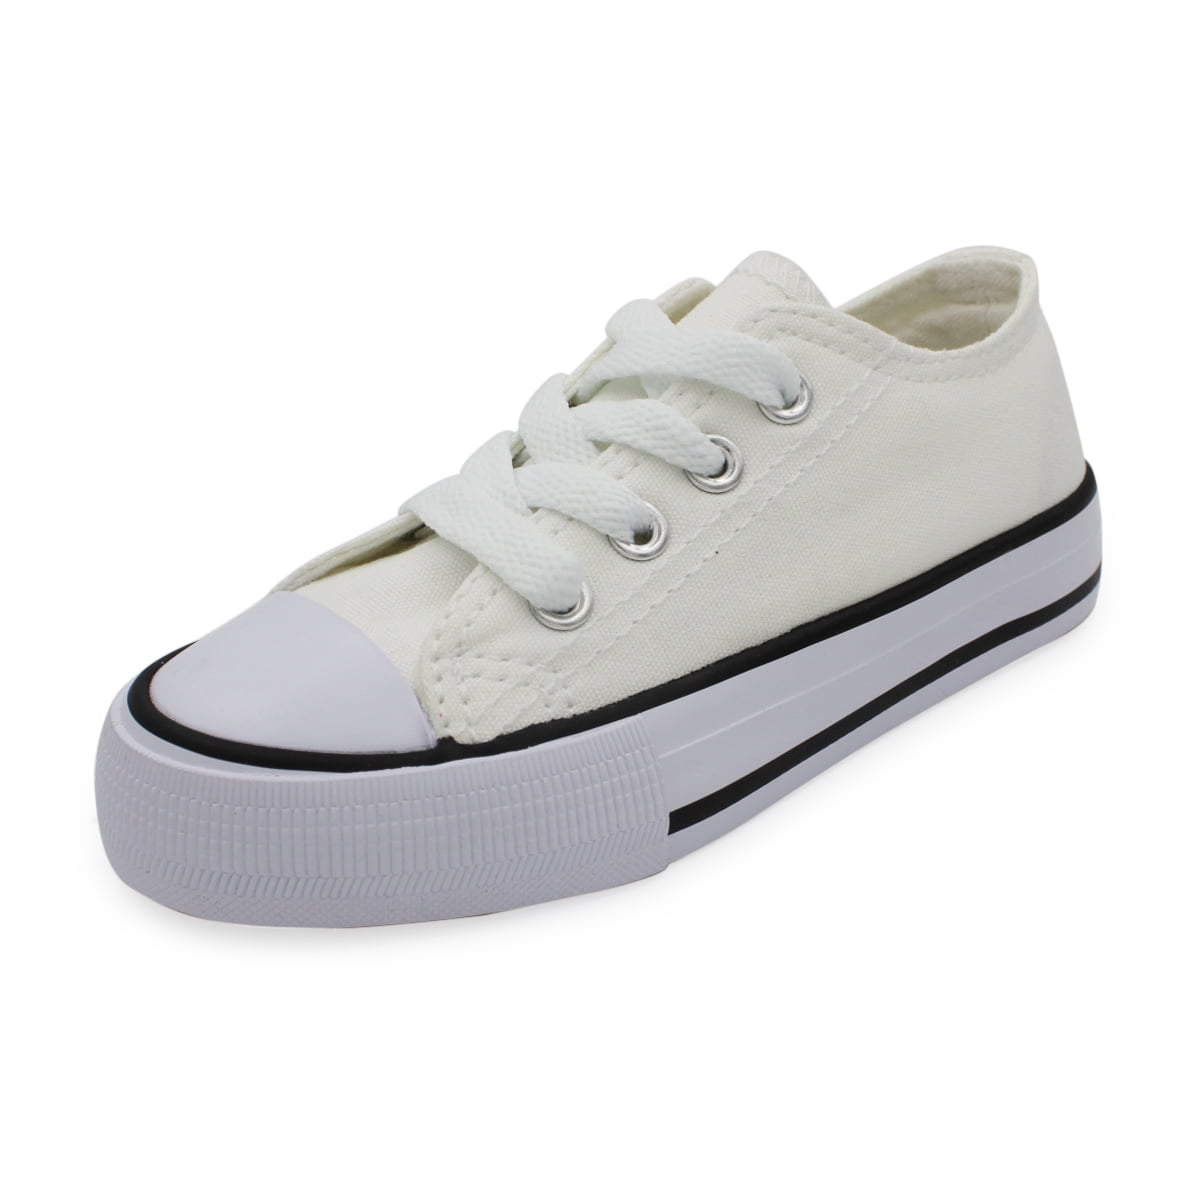 Canvas High Top Sneaker Casual Skate Shoe Boys Girls South Africa Flag